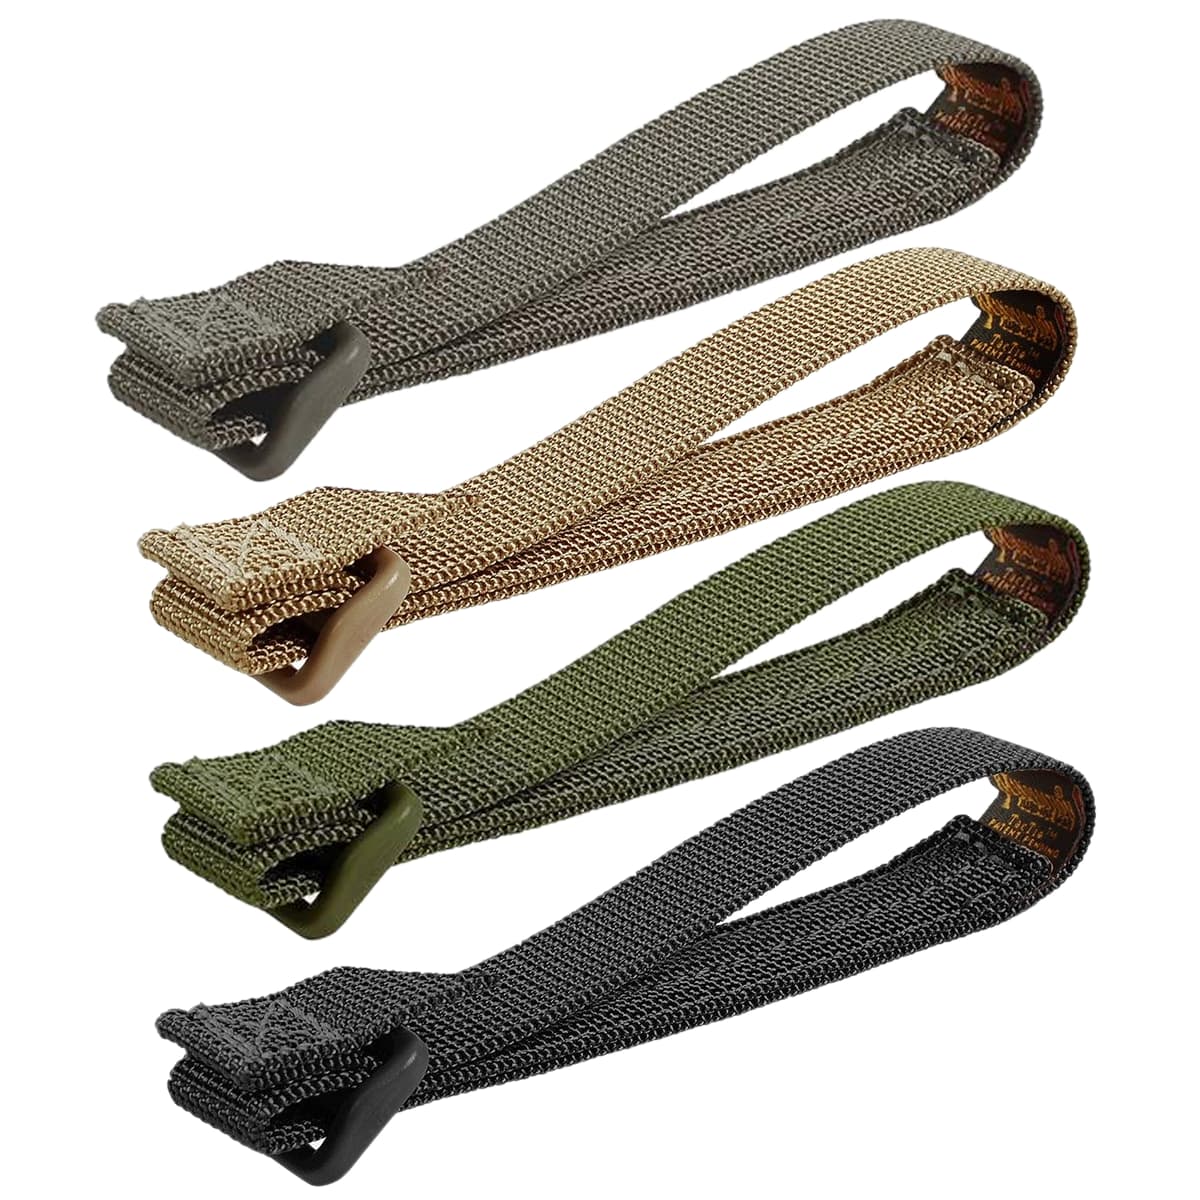 Maxpedition 5 TacTie Attachment Strap Black 9905B for sale online pack of 4 